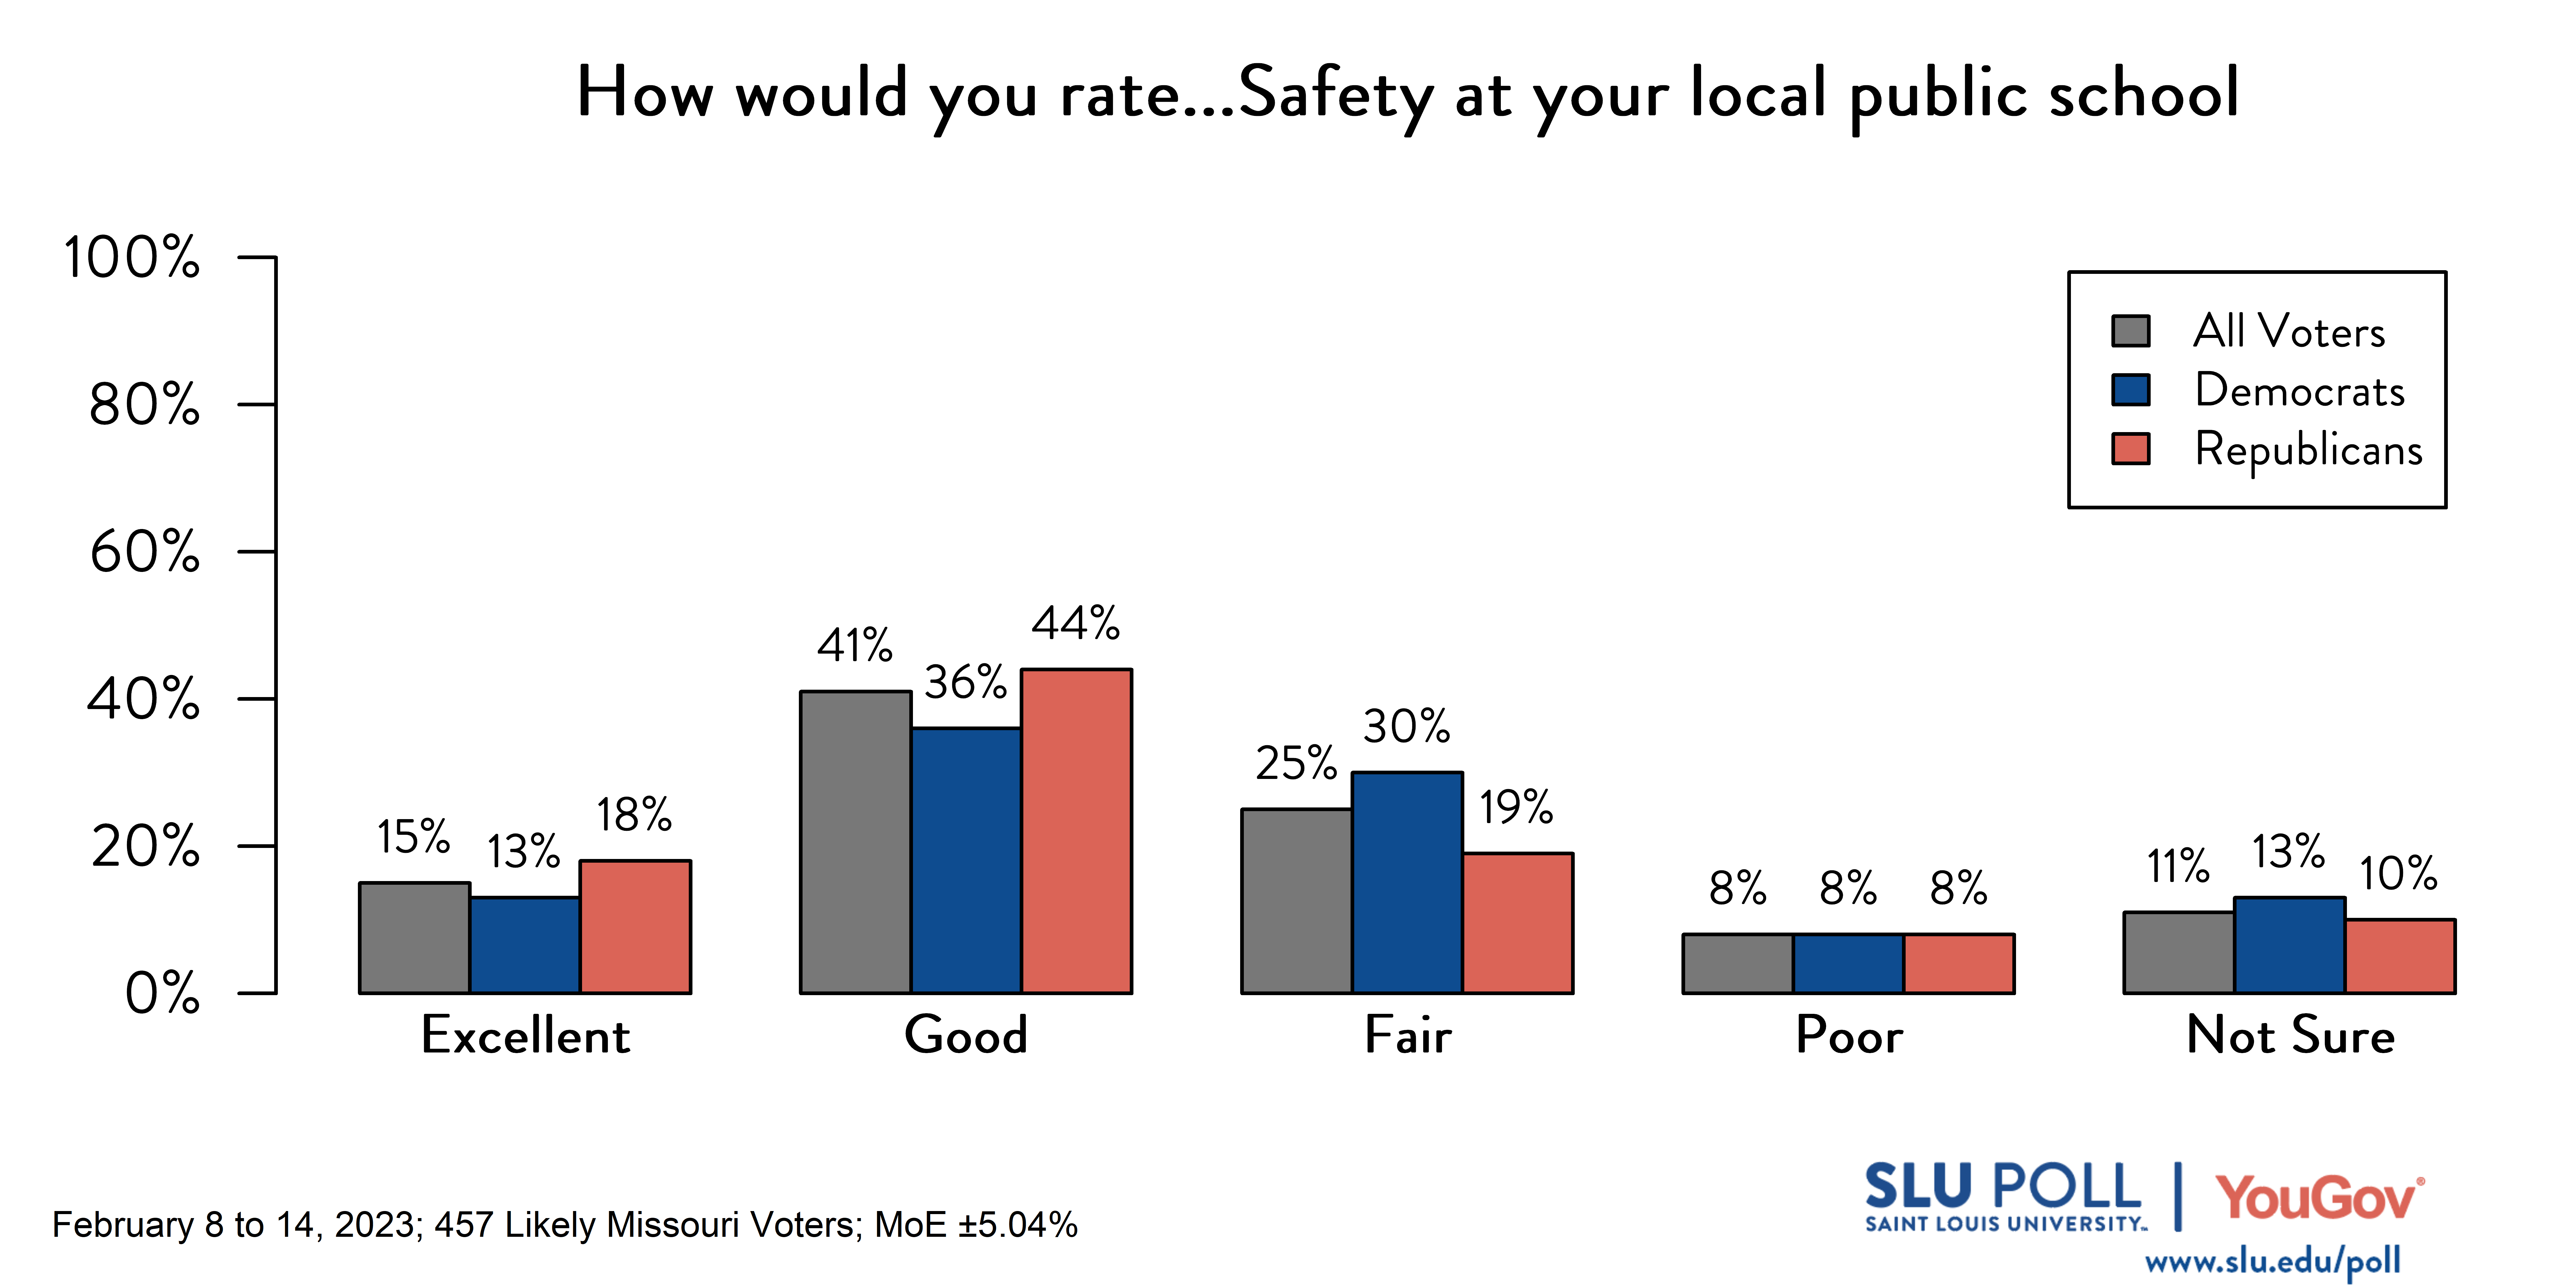 Likely voters' responses to 'How would you rate the condition of the following: Safety at your local public school?': 15% Excellent, 41% Good, 25% Fair, 8% Poor, and 11% Not sure. Democratic voters' responses: ' 13% Excellent, 36% Good, 30% Fair, 8% Poor, and 13% Not sure. Republican voters' responses: 18% Excellent, 44% Good, 19% Fair, 8% Poor, and 10% Not sure.